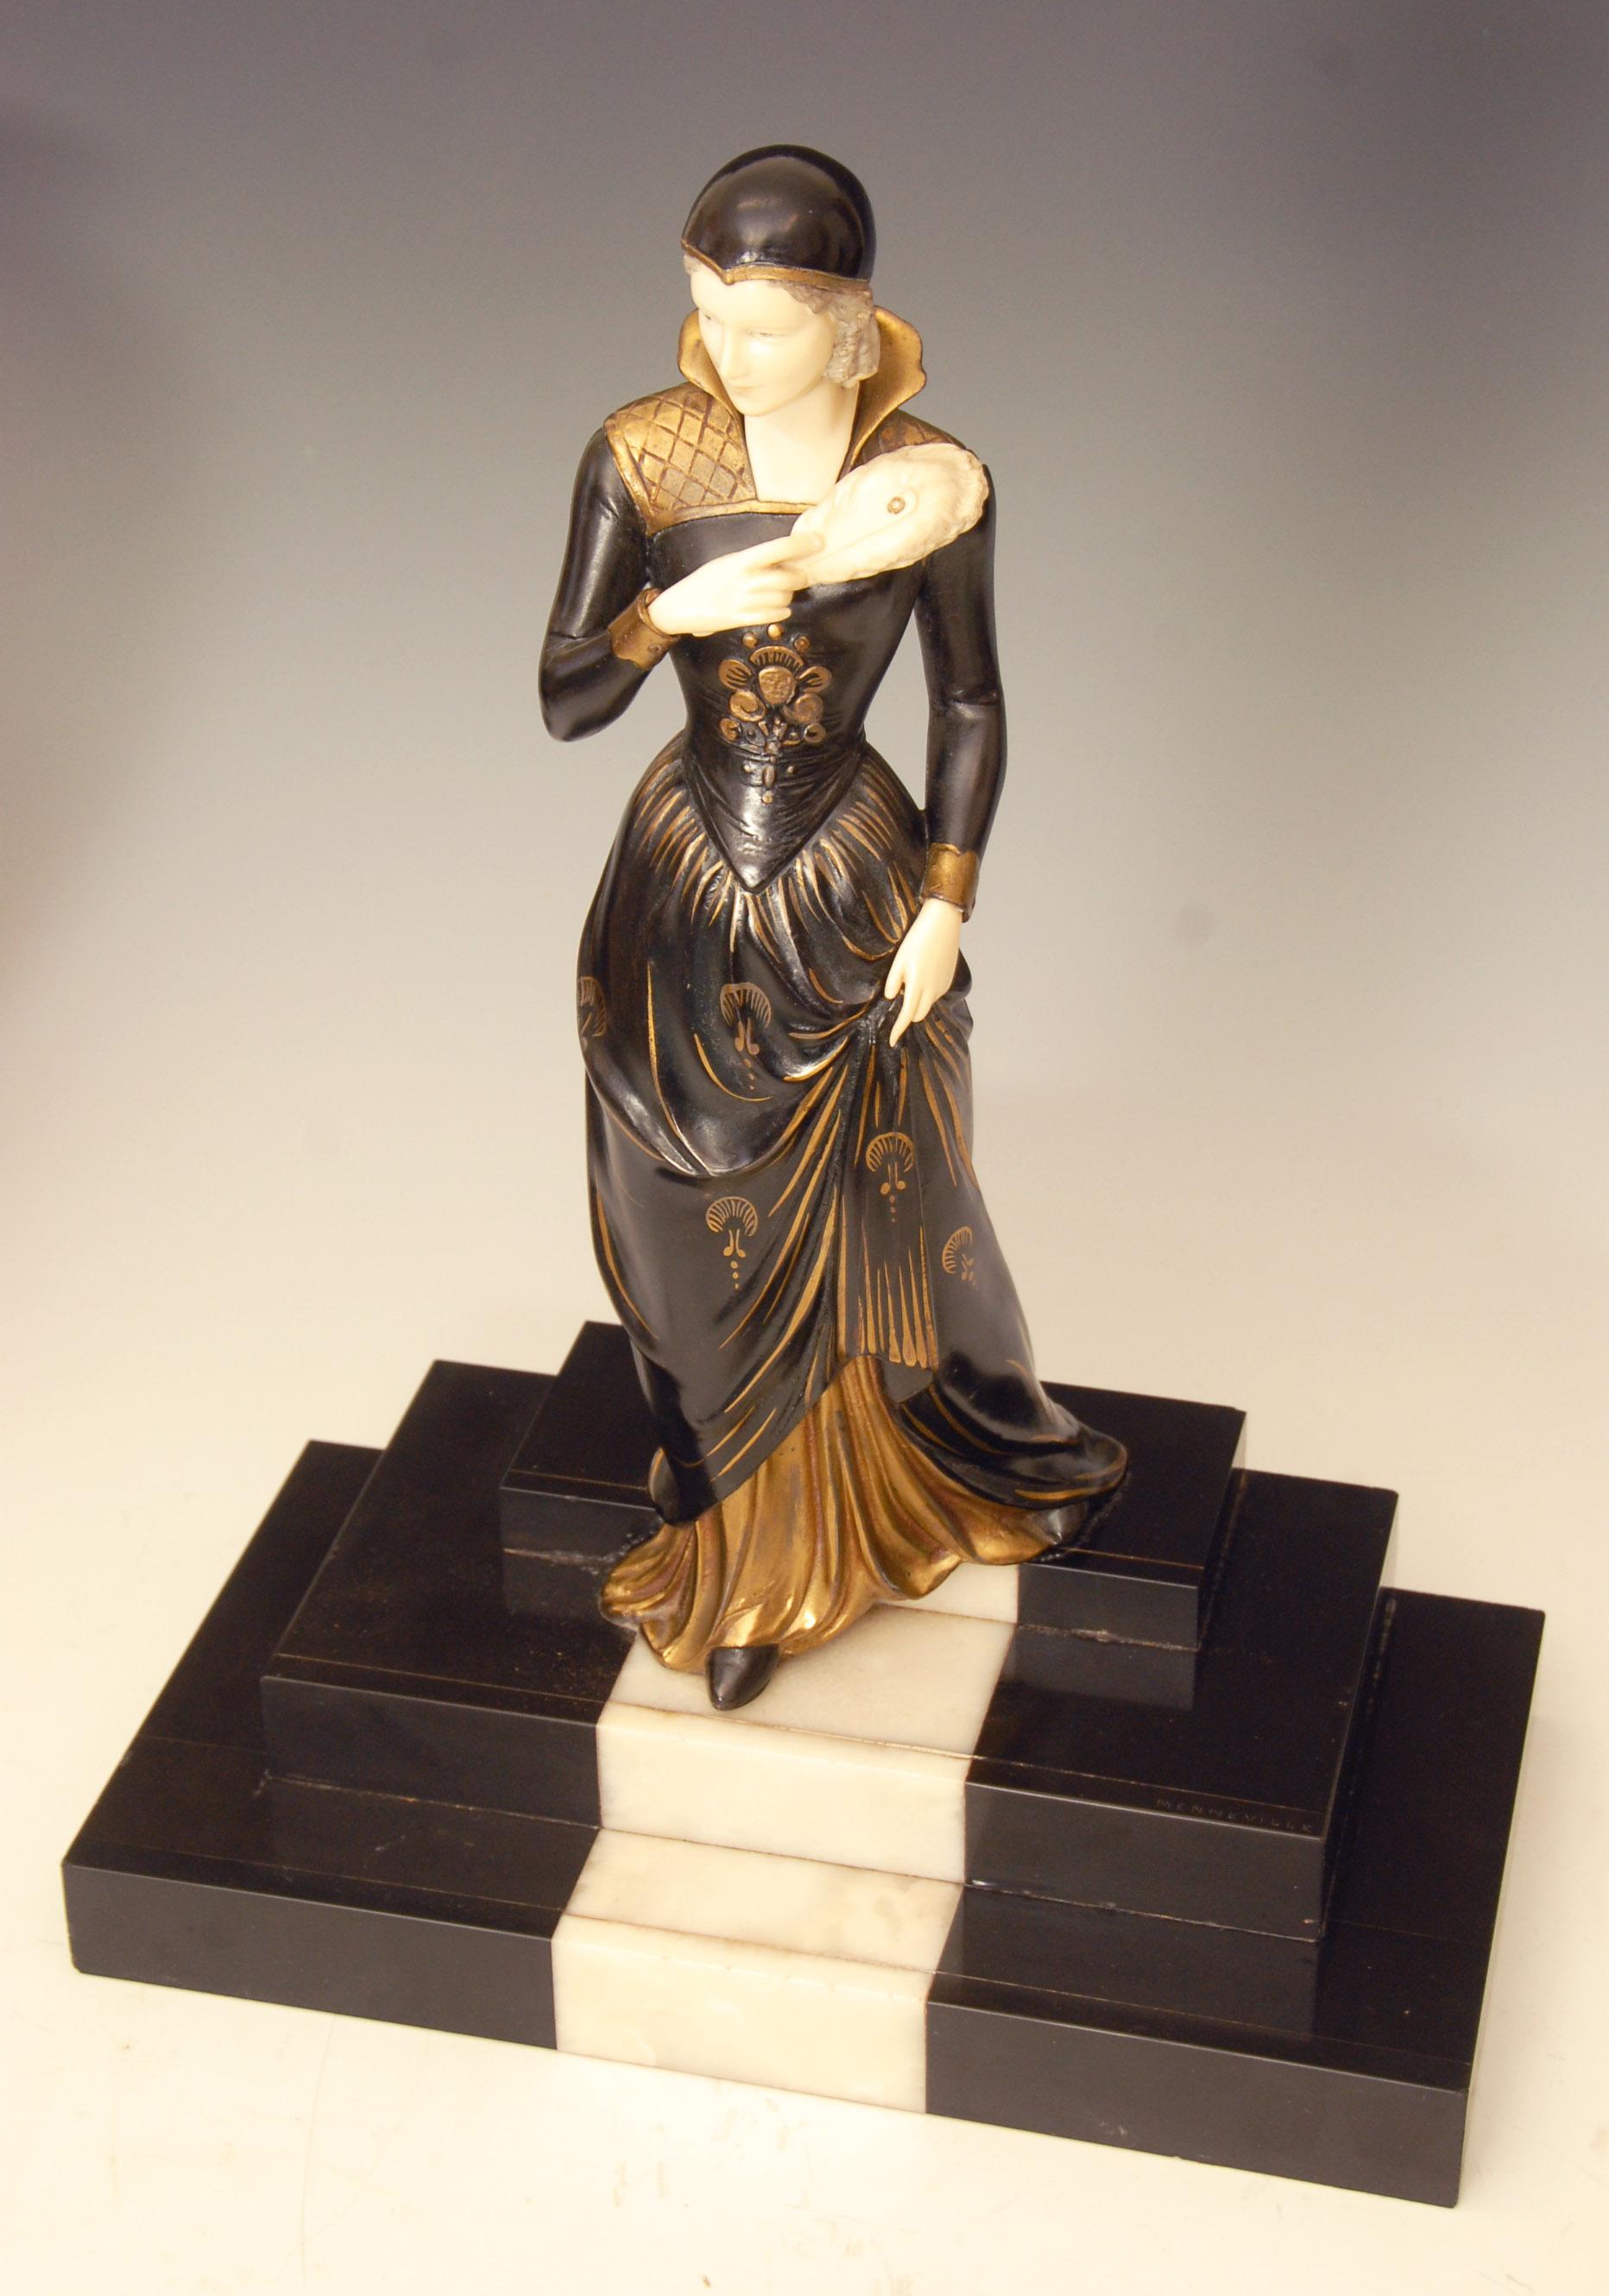 Large French Art Deco figure of a bronzed metal and ivorine or phenolic lady descending a marble staircase. Signed by E . Mennevile.